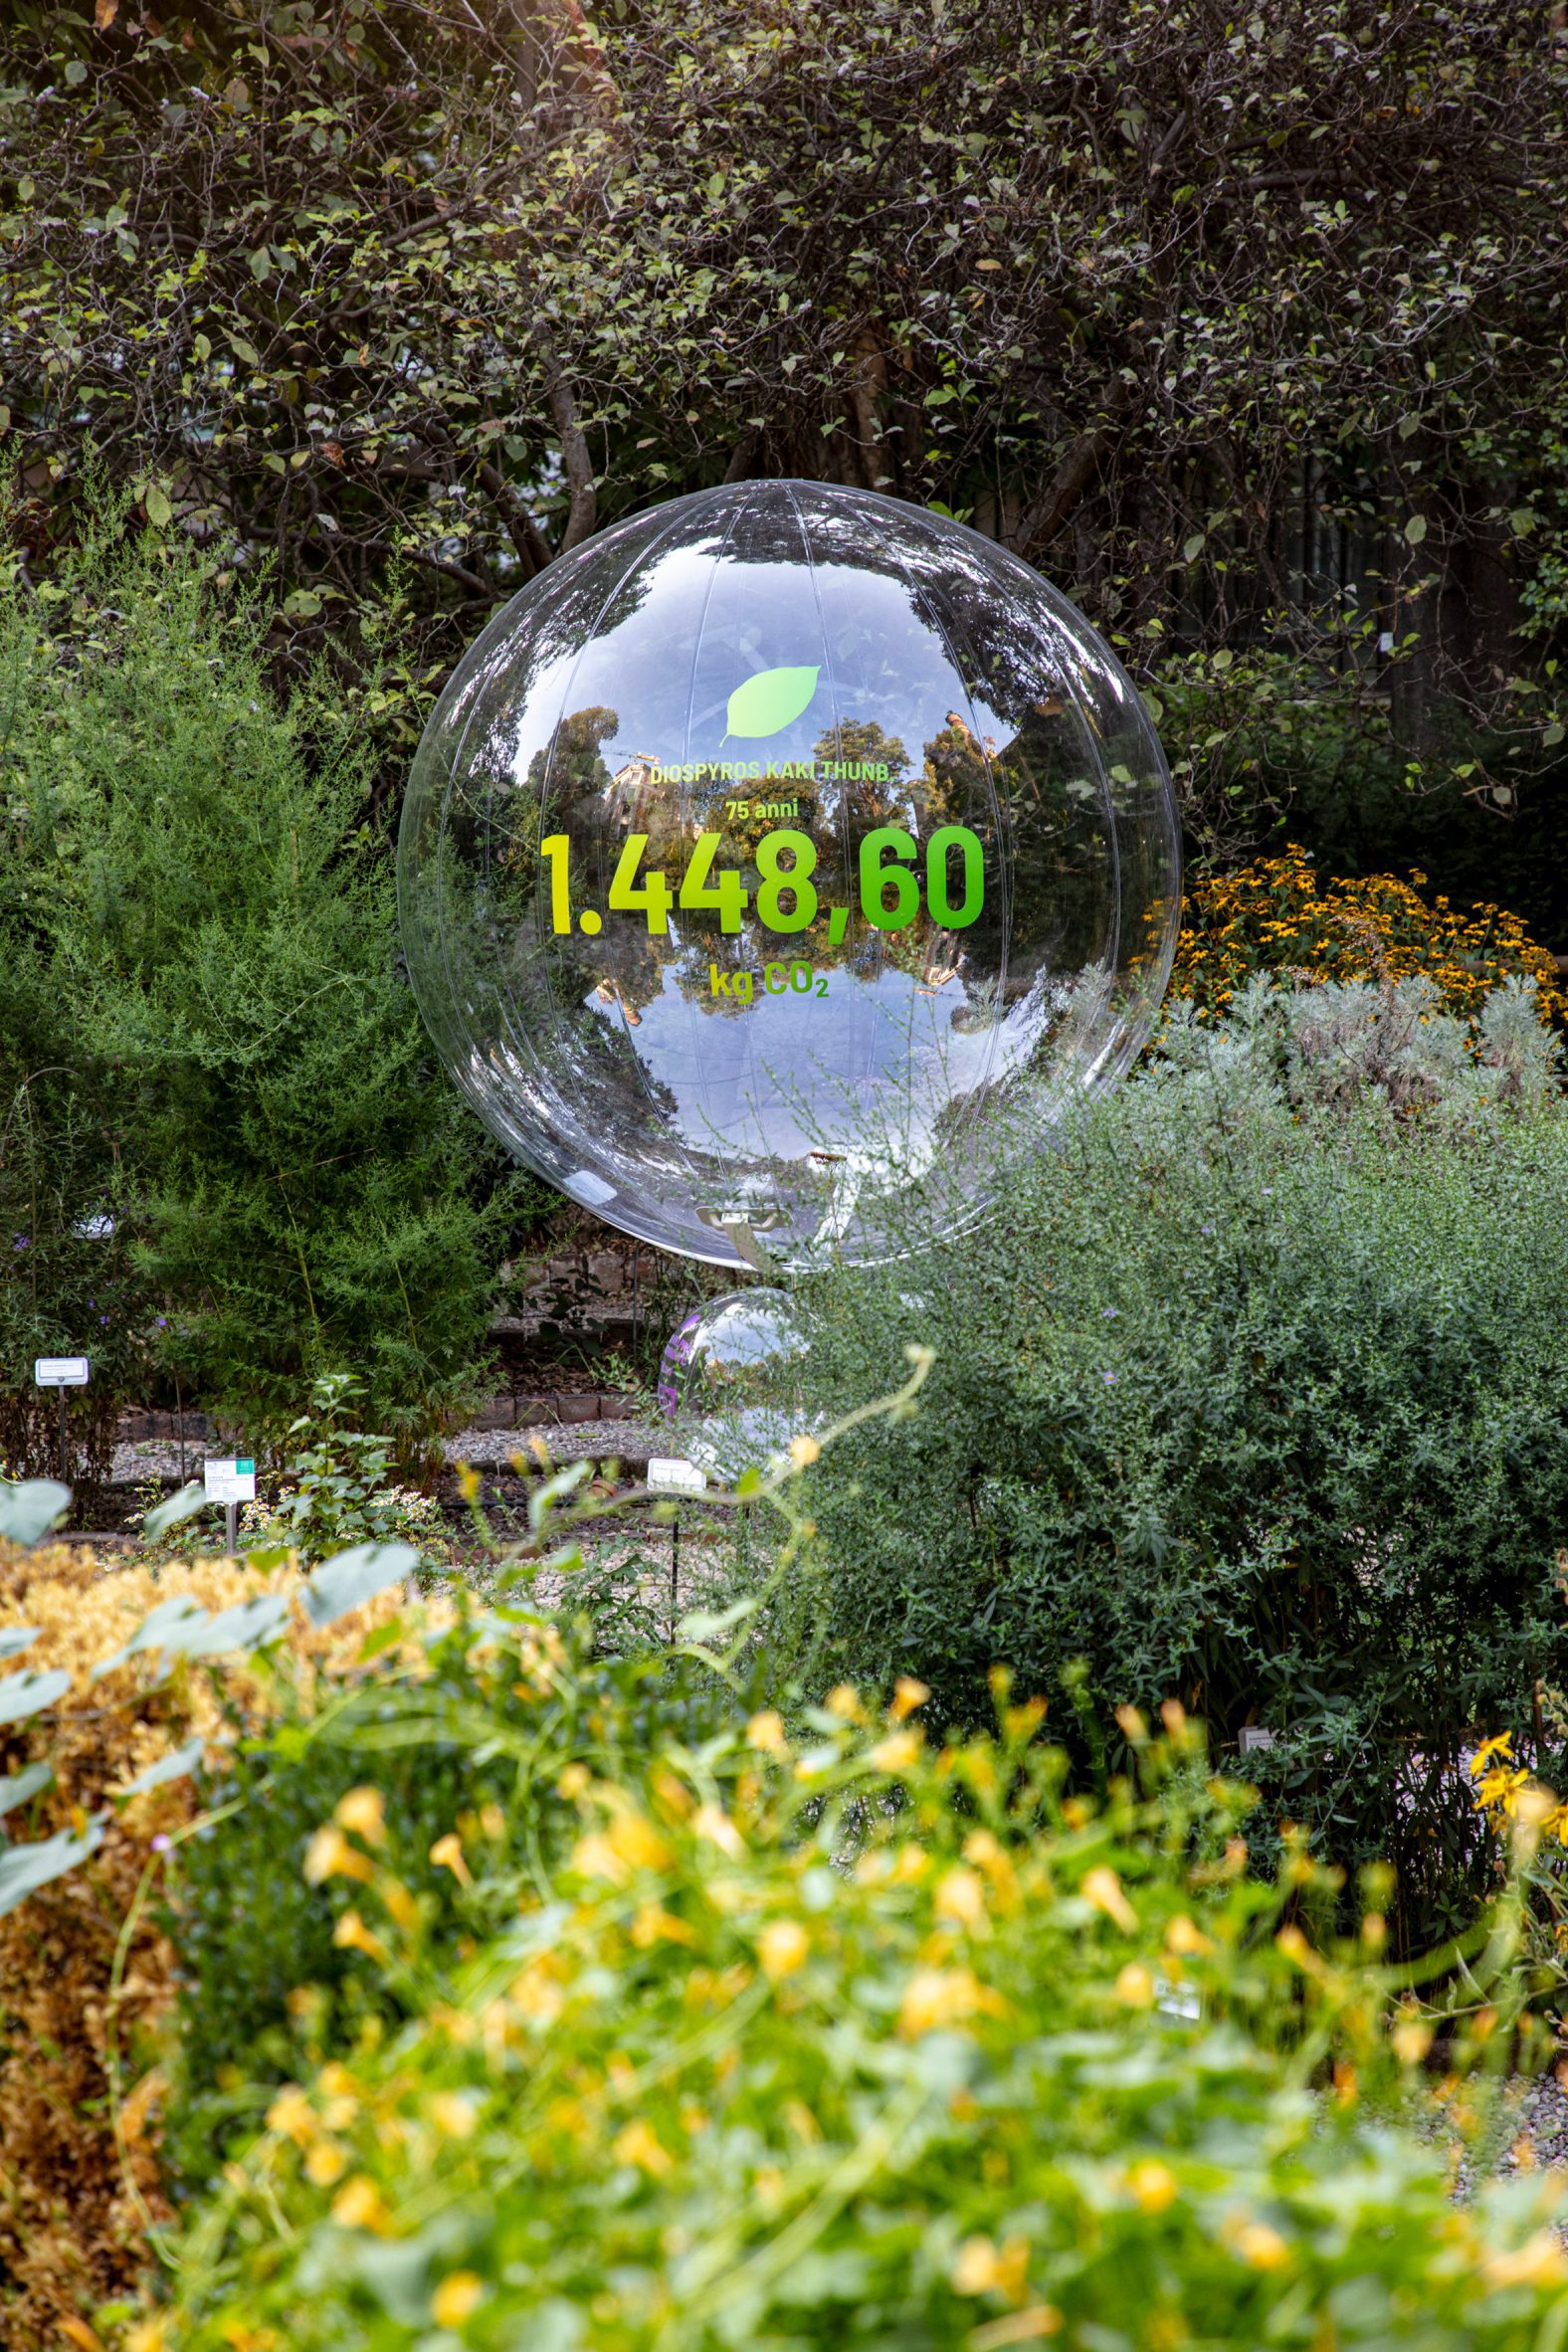 A transparent sphere with the number 1,448.60 printed on it